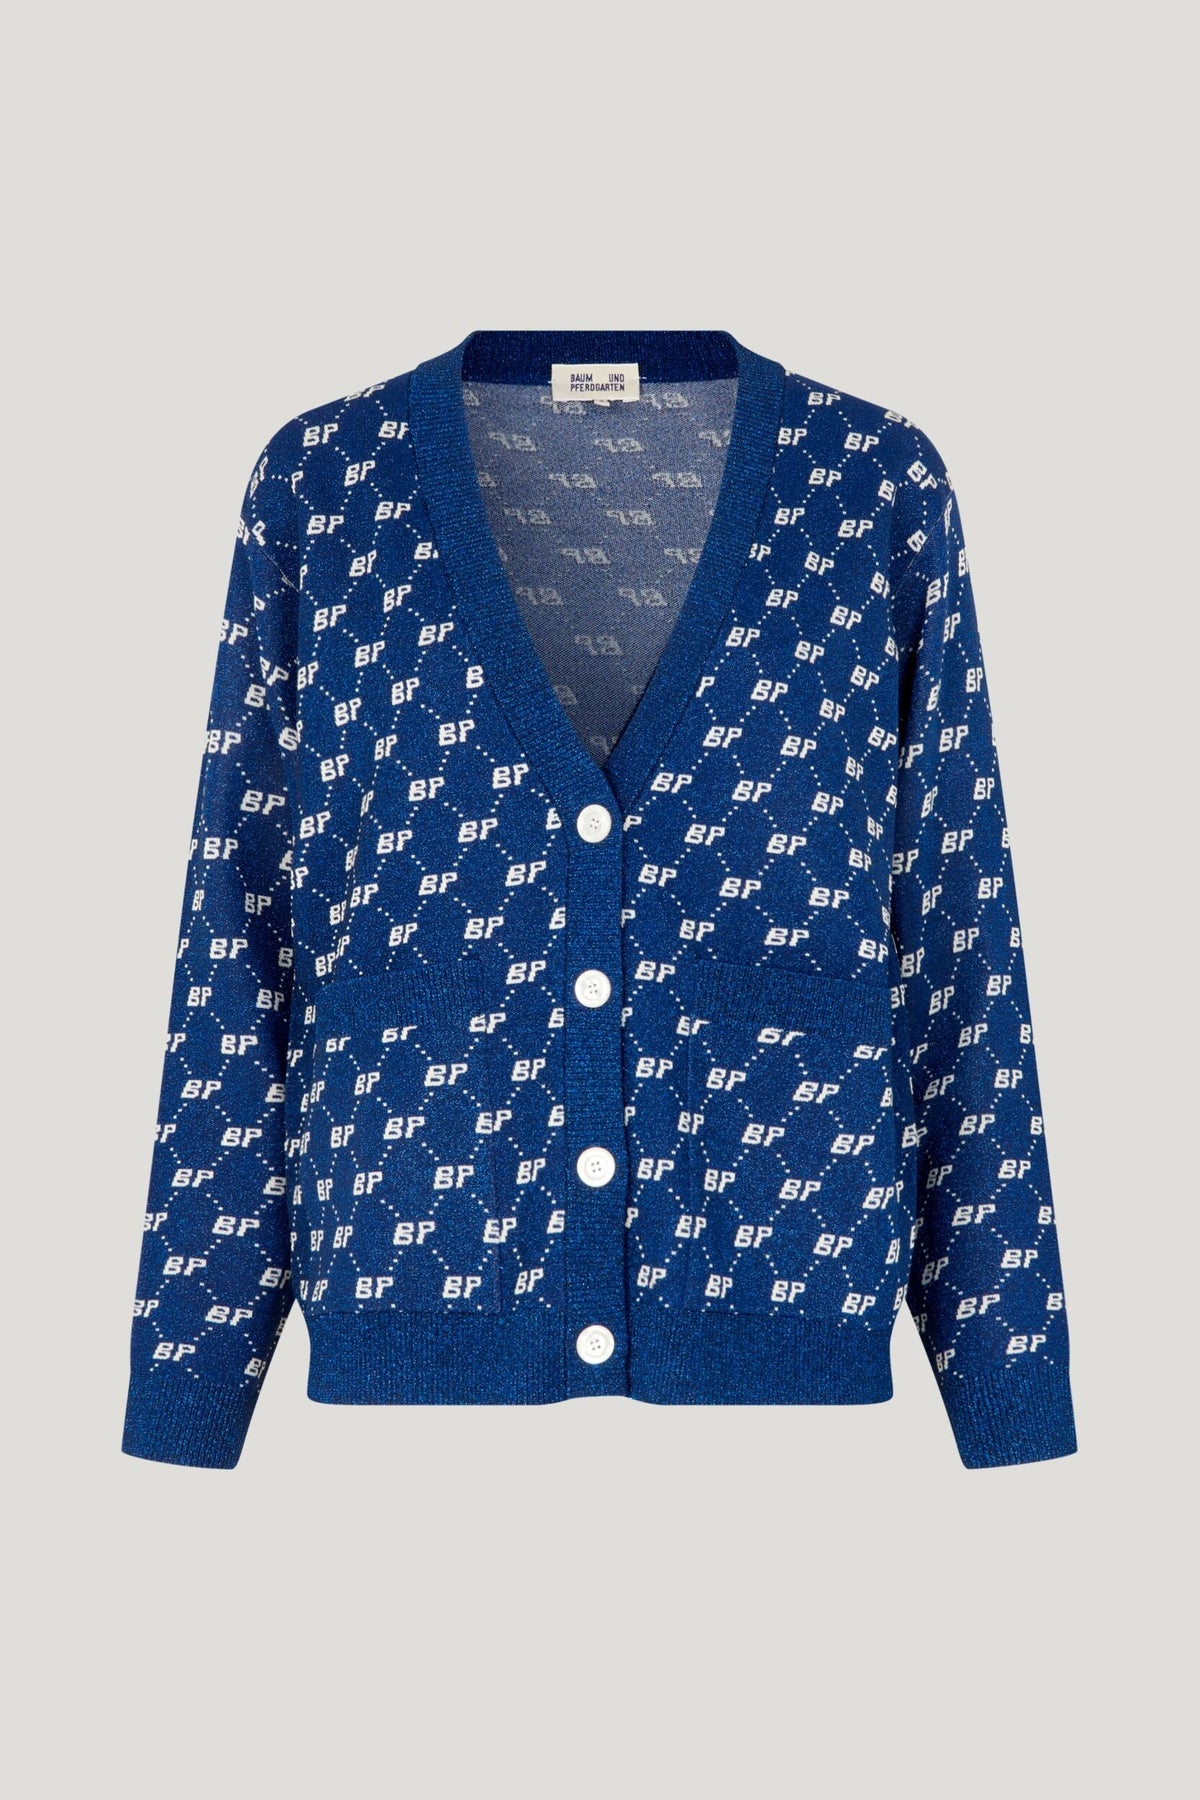 Blue and white cardigan with a V neck and lurex details